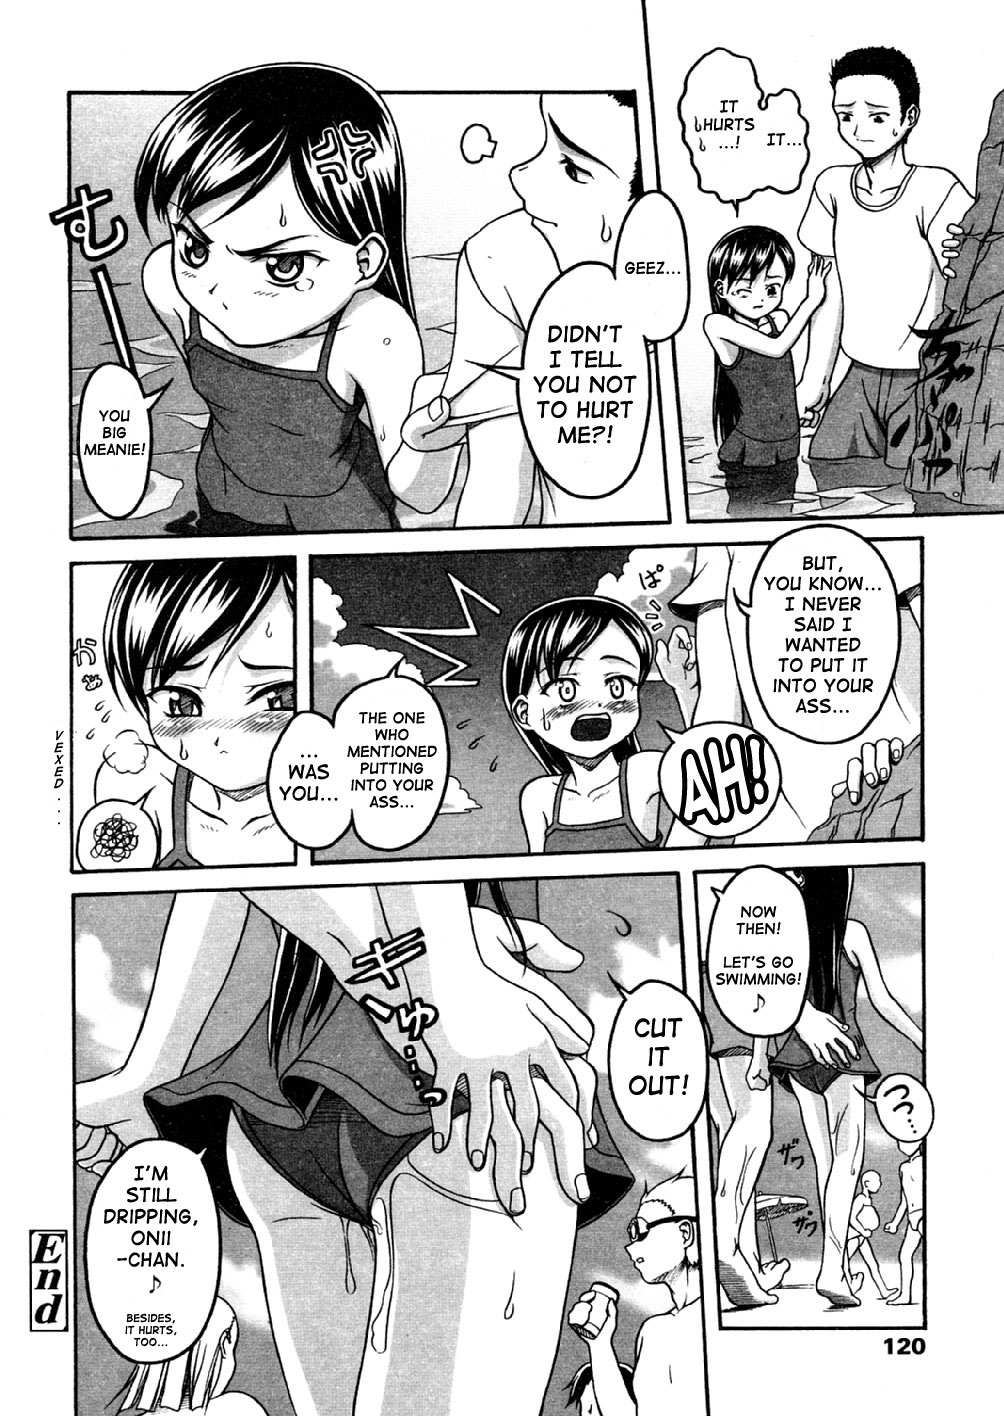 [Semine Masashige] Anal Water - Love with a grade school girl in a swimsuit [English] page 16 full